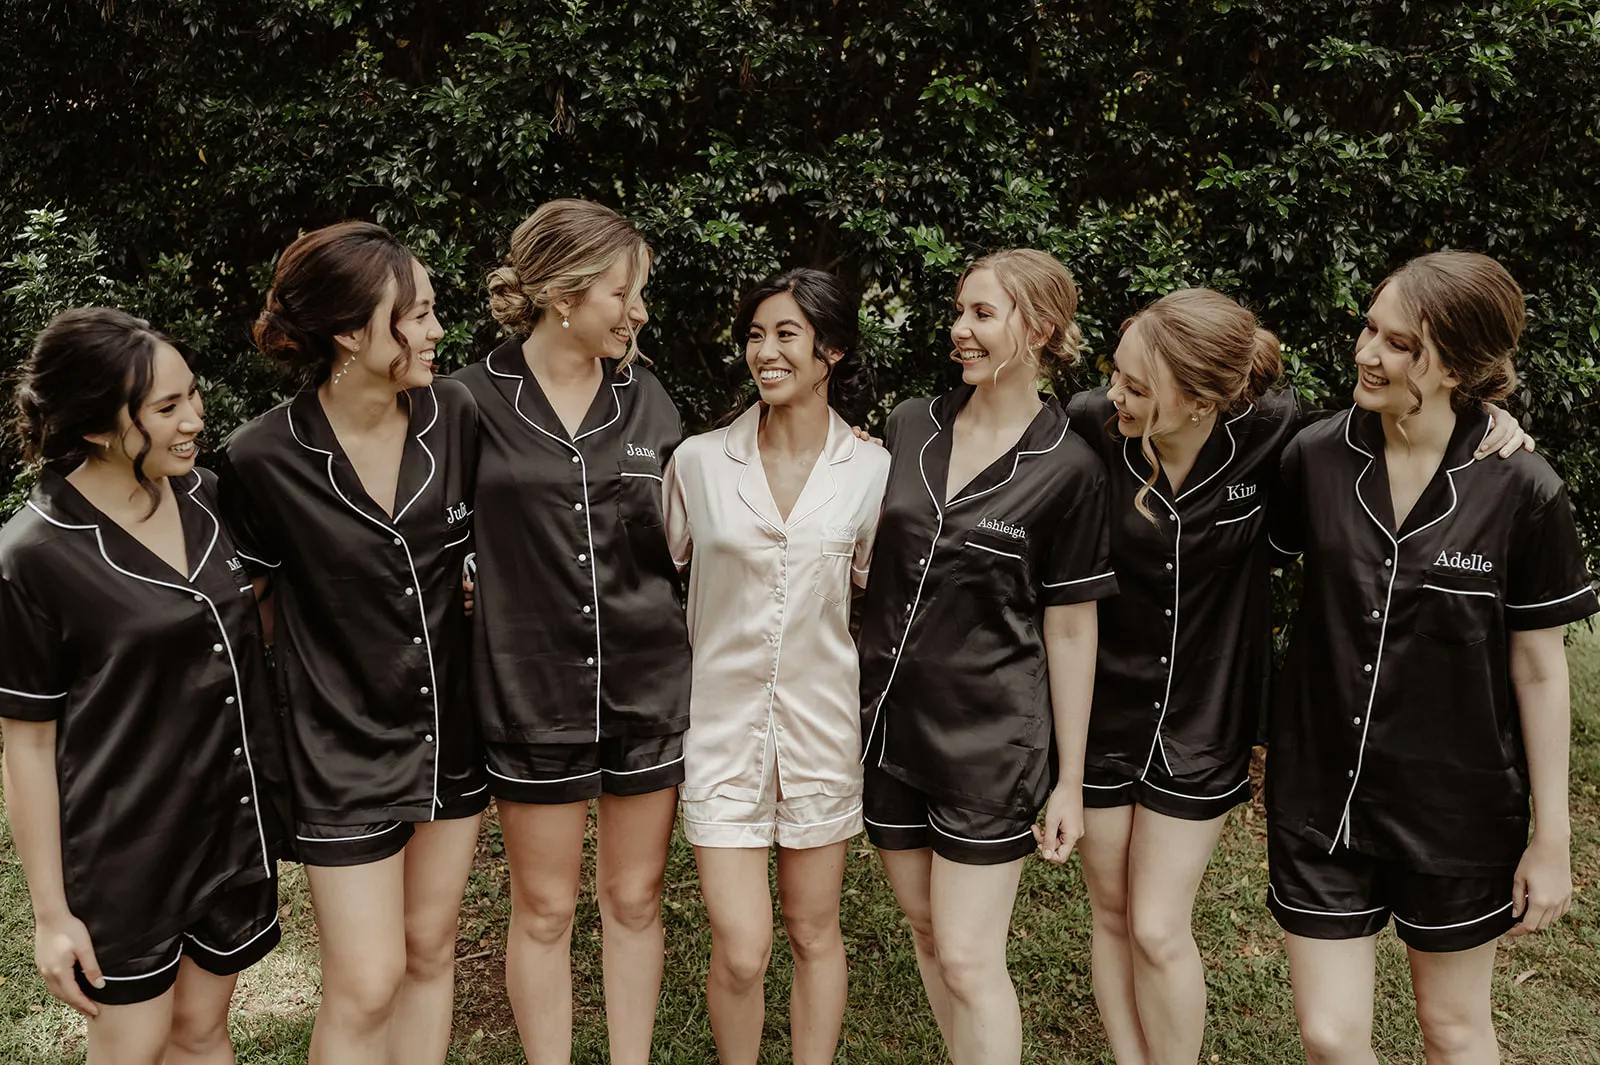 Seven women stand together outdoors, smiling and wearing matching pajamas. Six women wear black pajamas while one, in the center, wears white. They stand with arms around each other in front of a lush, green background.